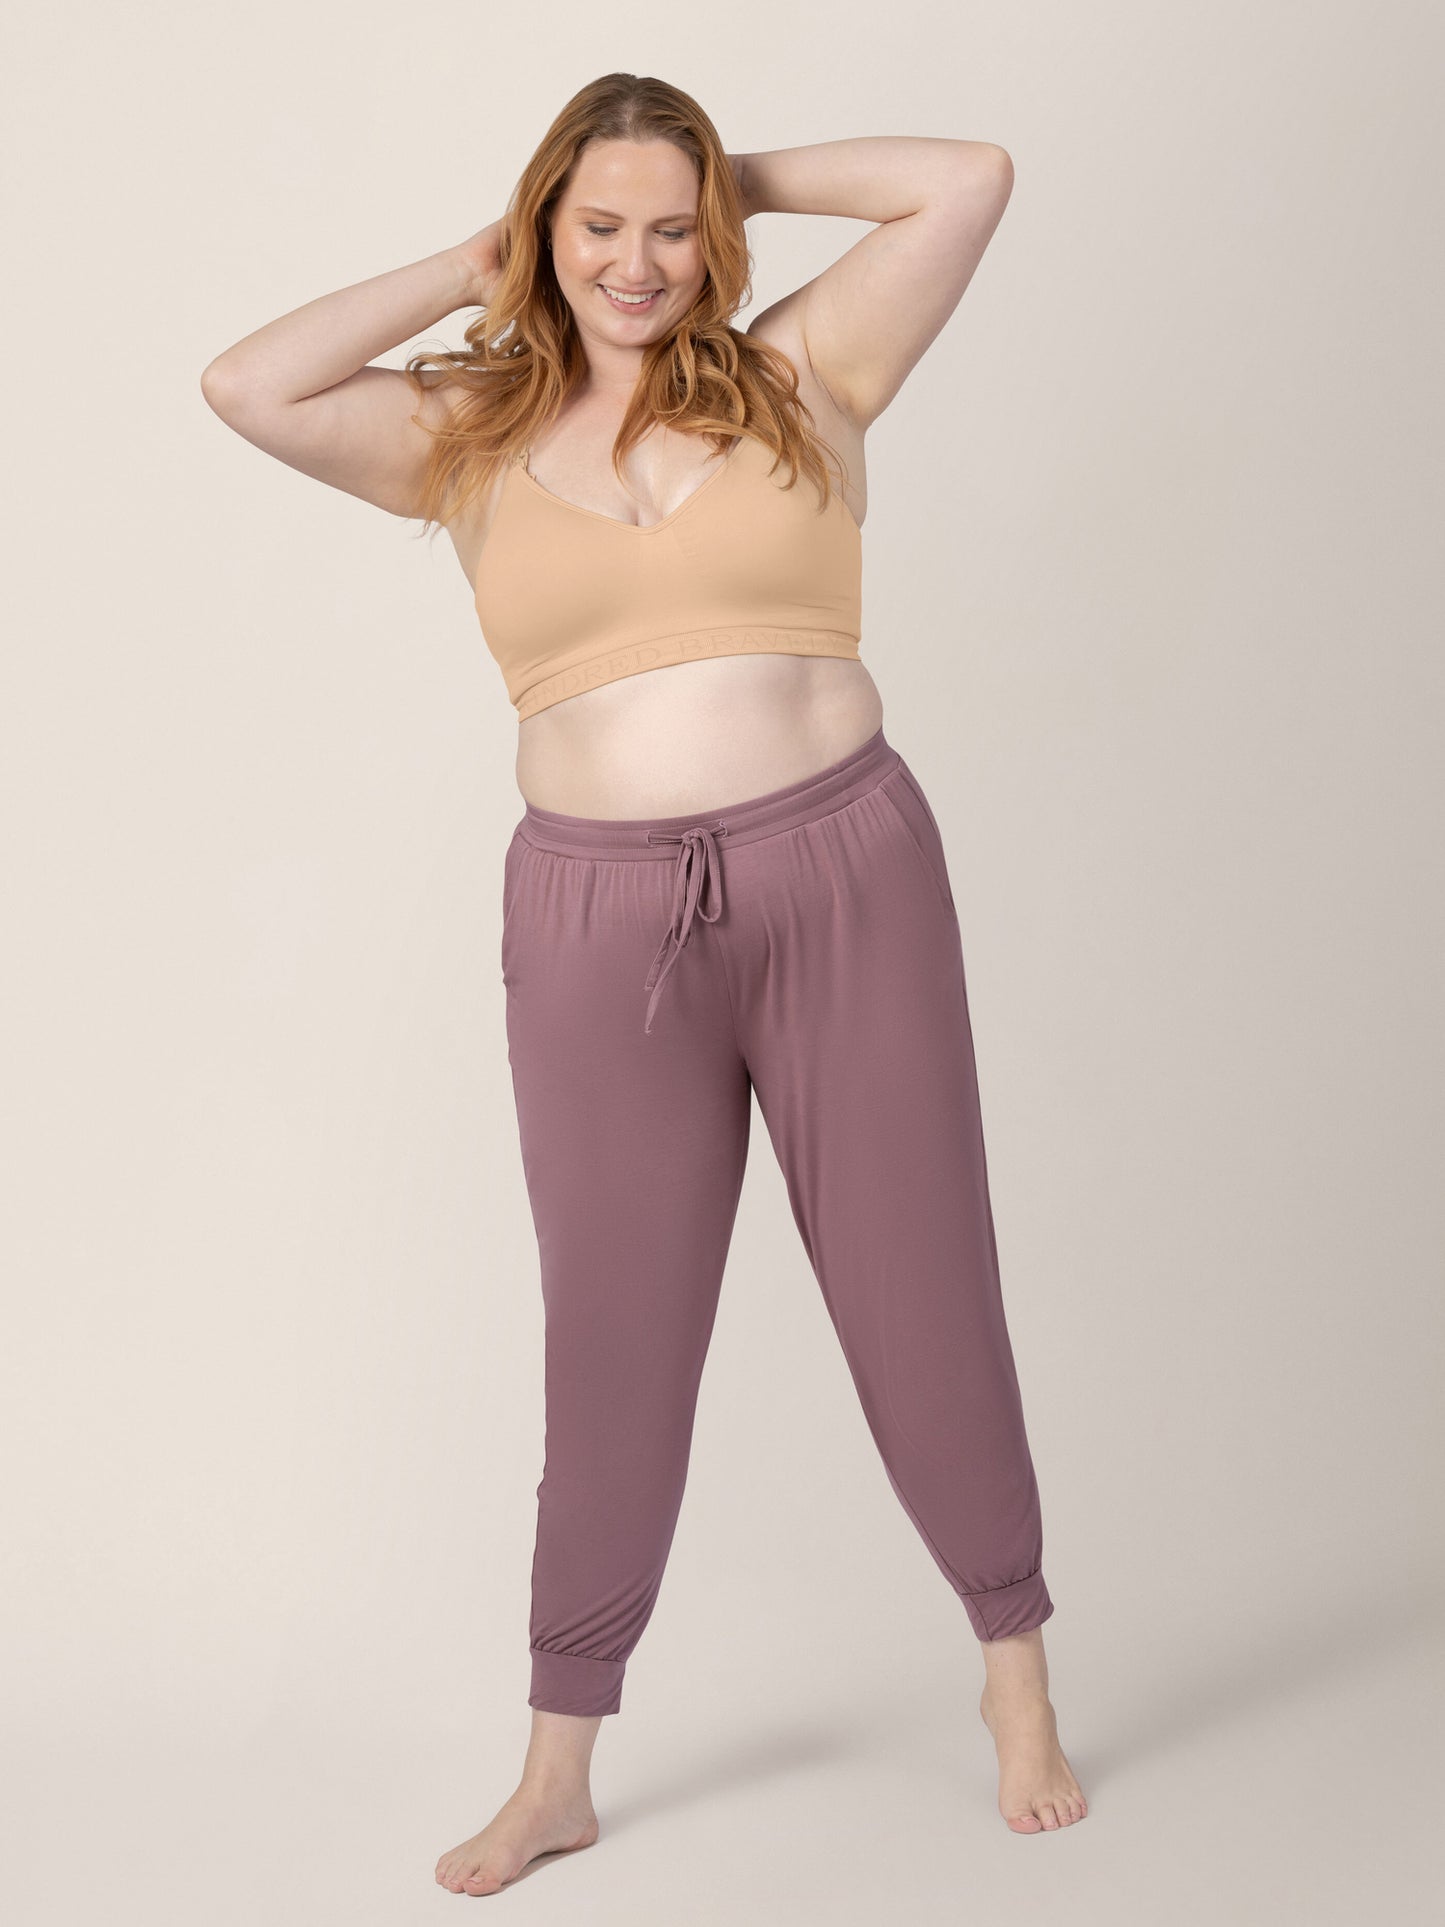 Full body view of a model wearing the Signature Sublime® Contour Hands-Free Pumping & Nursing Bra in Beige